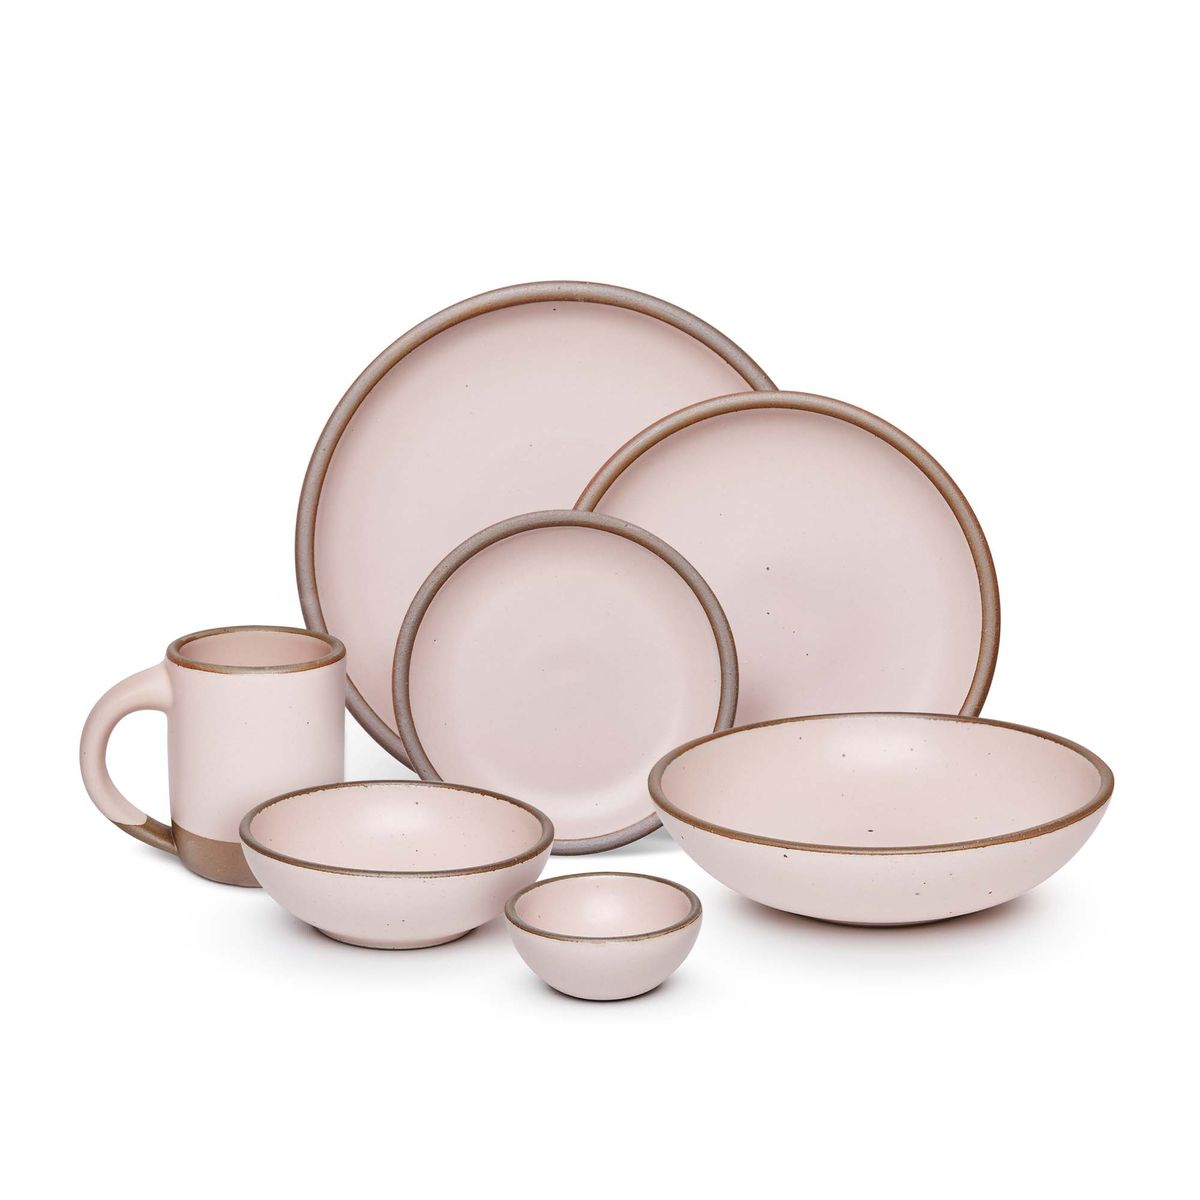 The Mug, bitty bowl, breakfast bowl, everyday bowl, cake plate, side plate and dinner plate paired together in a soft light pink color featuring iron speckles